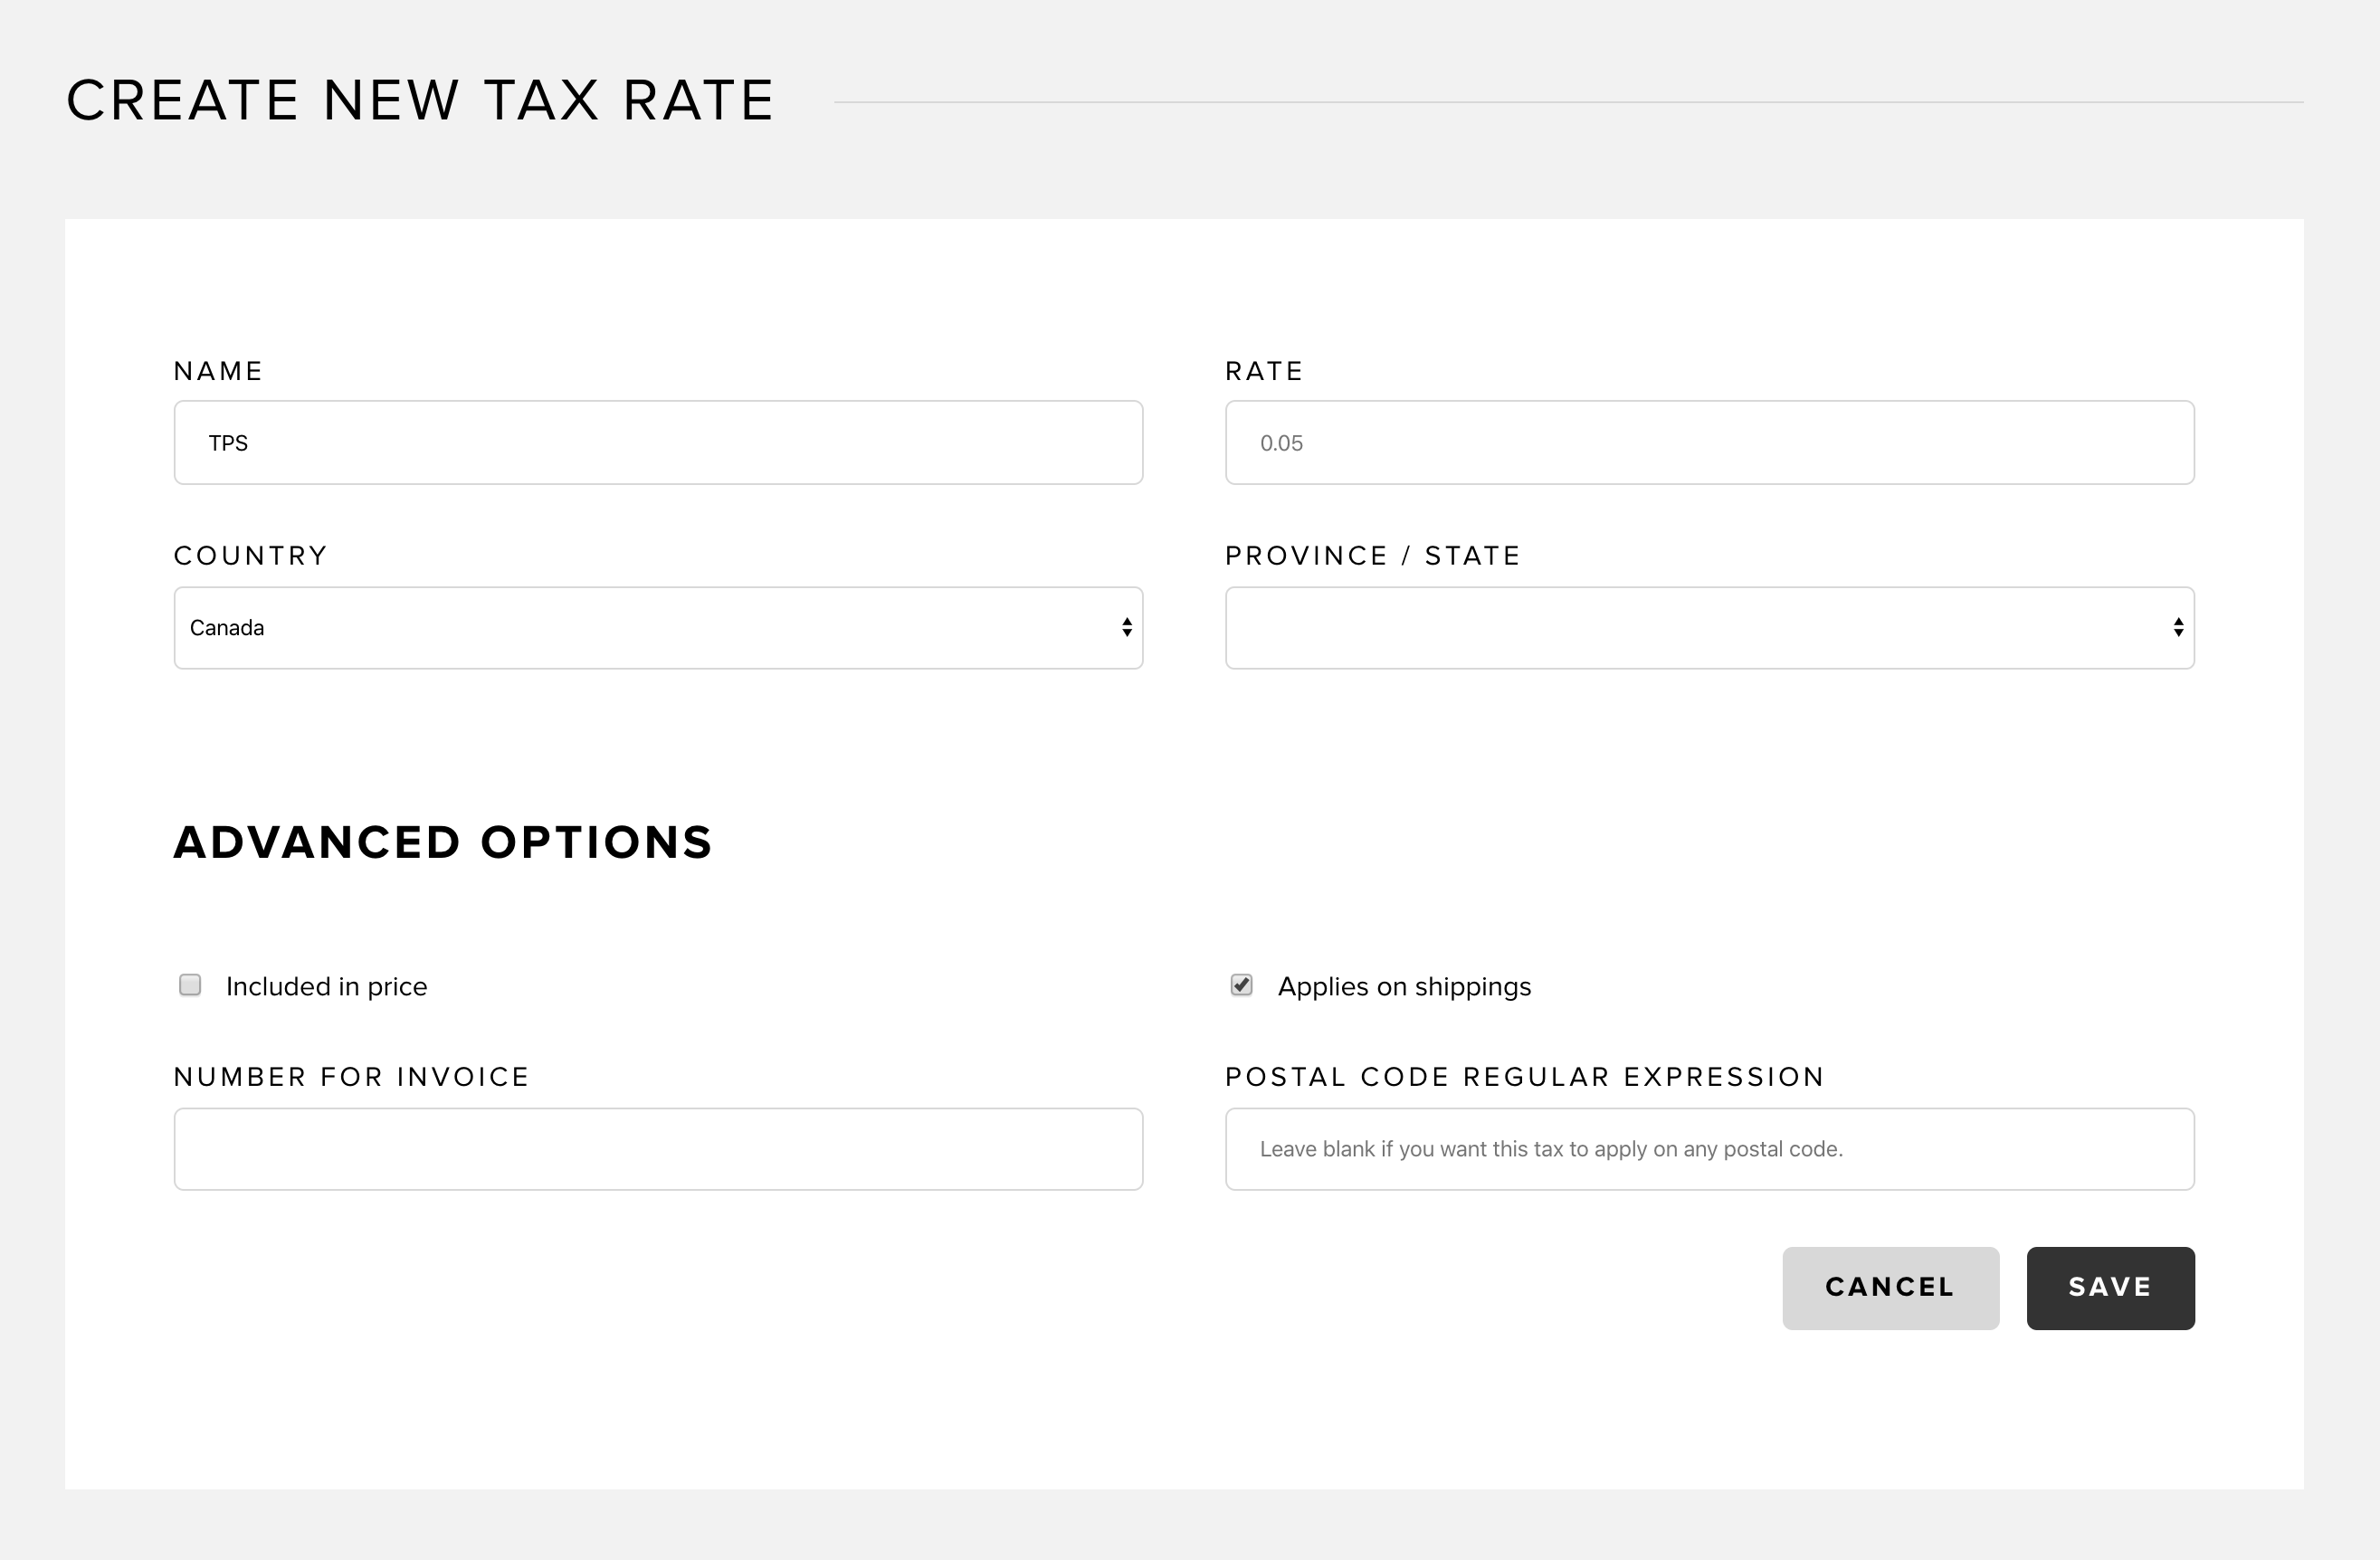 Creating a new tax rate with Snipcart